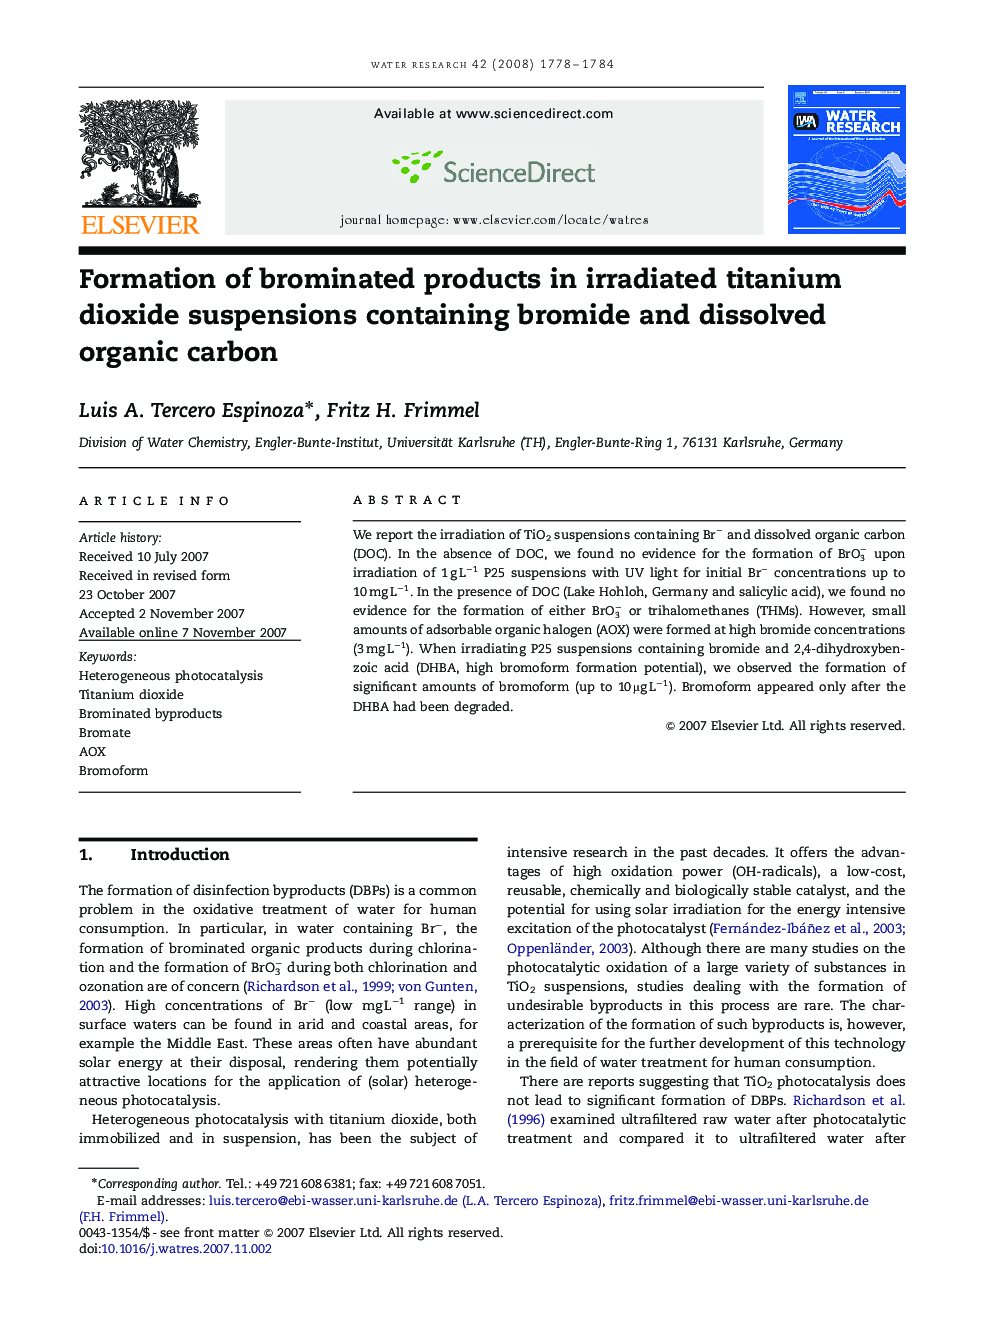 Formation of brominated products in irradiated titanium dioxide suspensions containing bromide and dissolved organic carbon